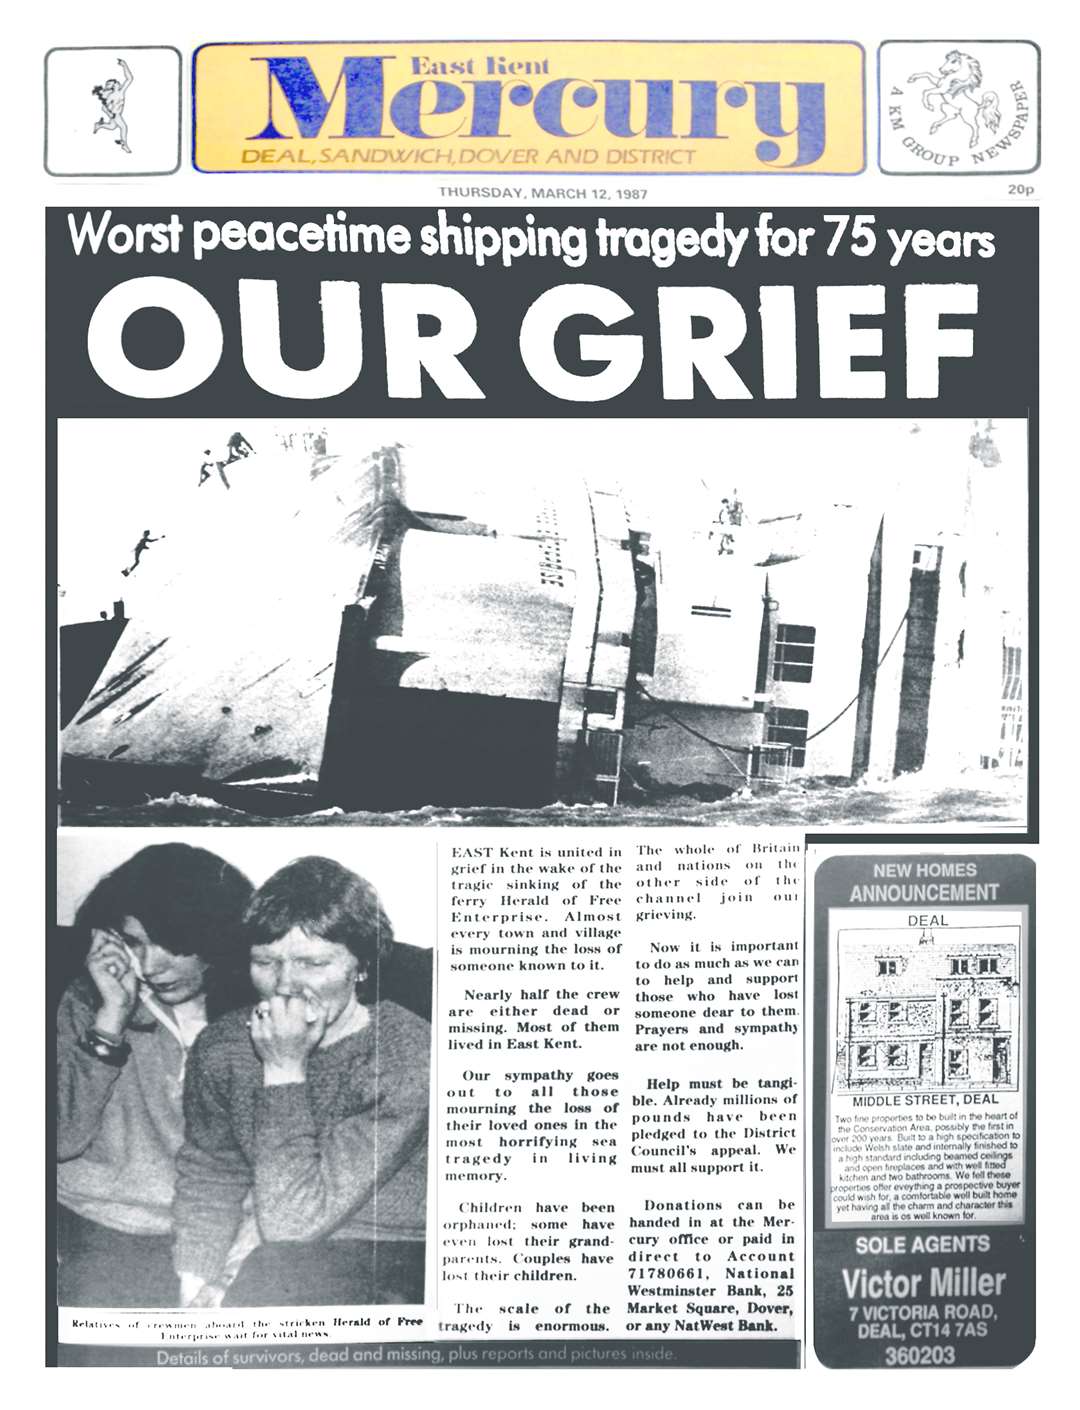 How the Mercury first detailed the tragedy, the edition of March 12, 1987